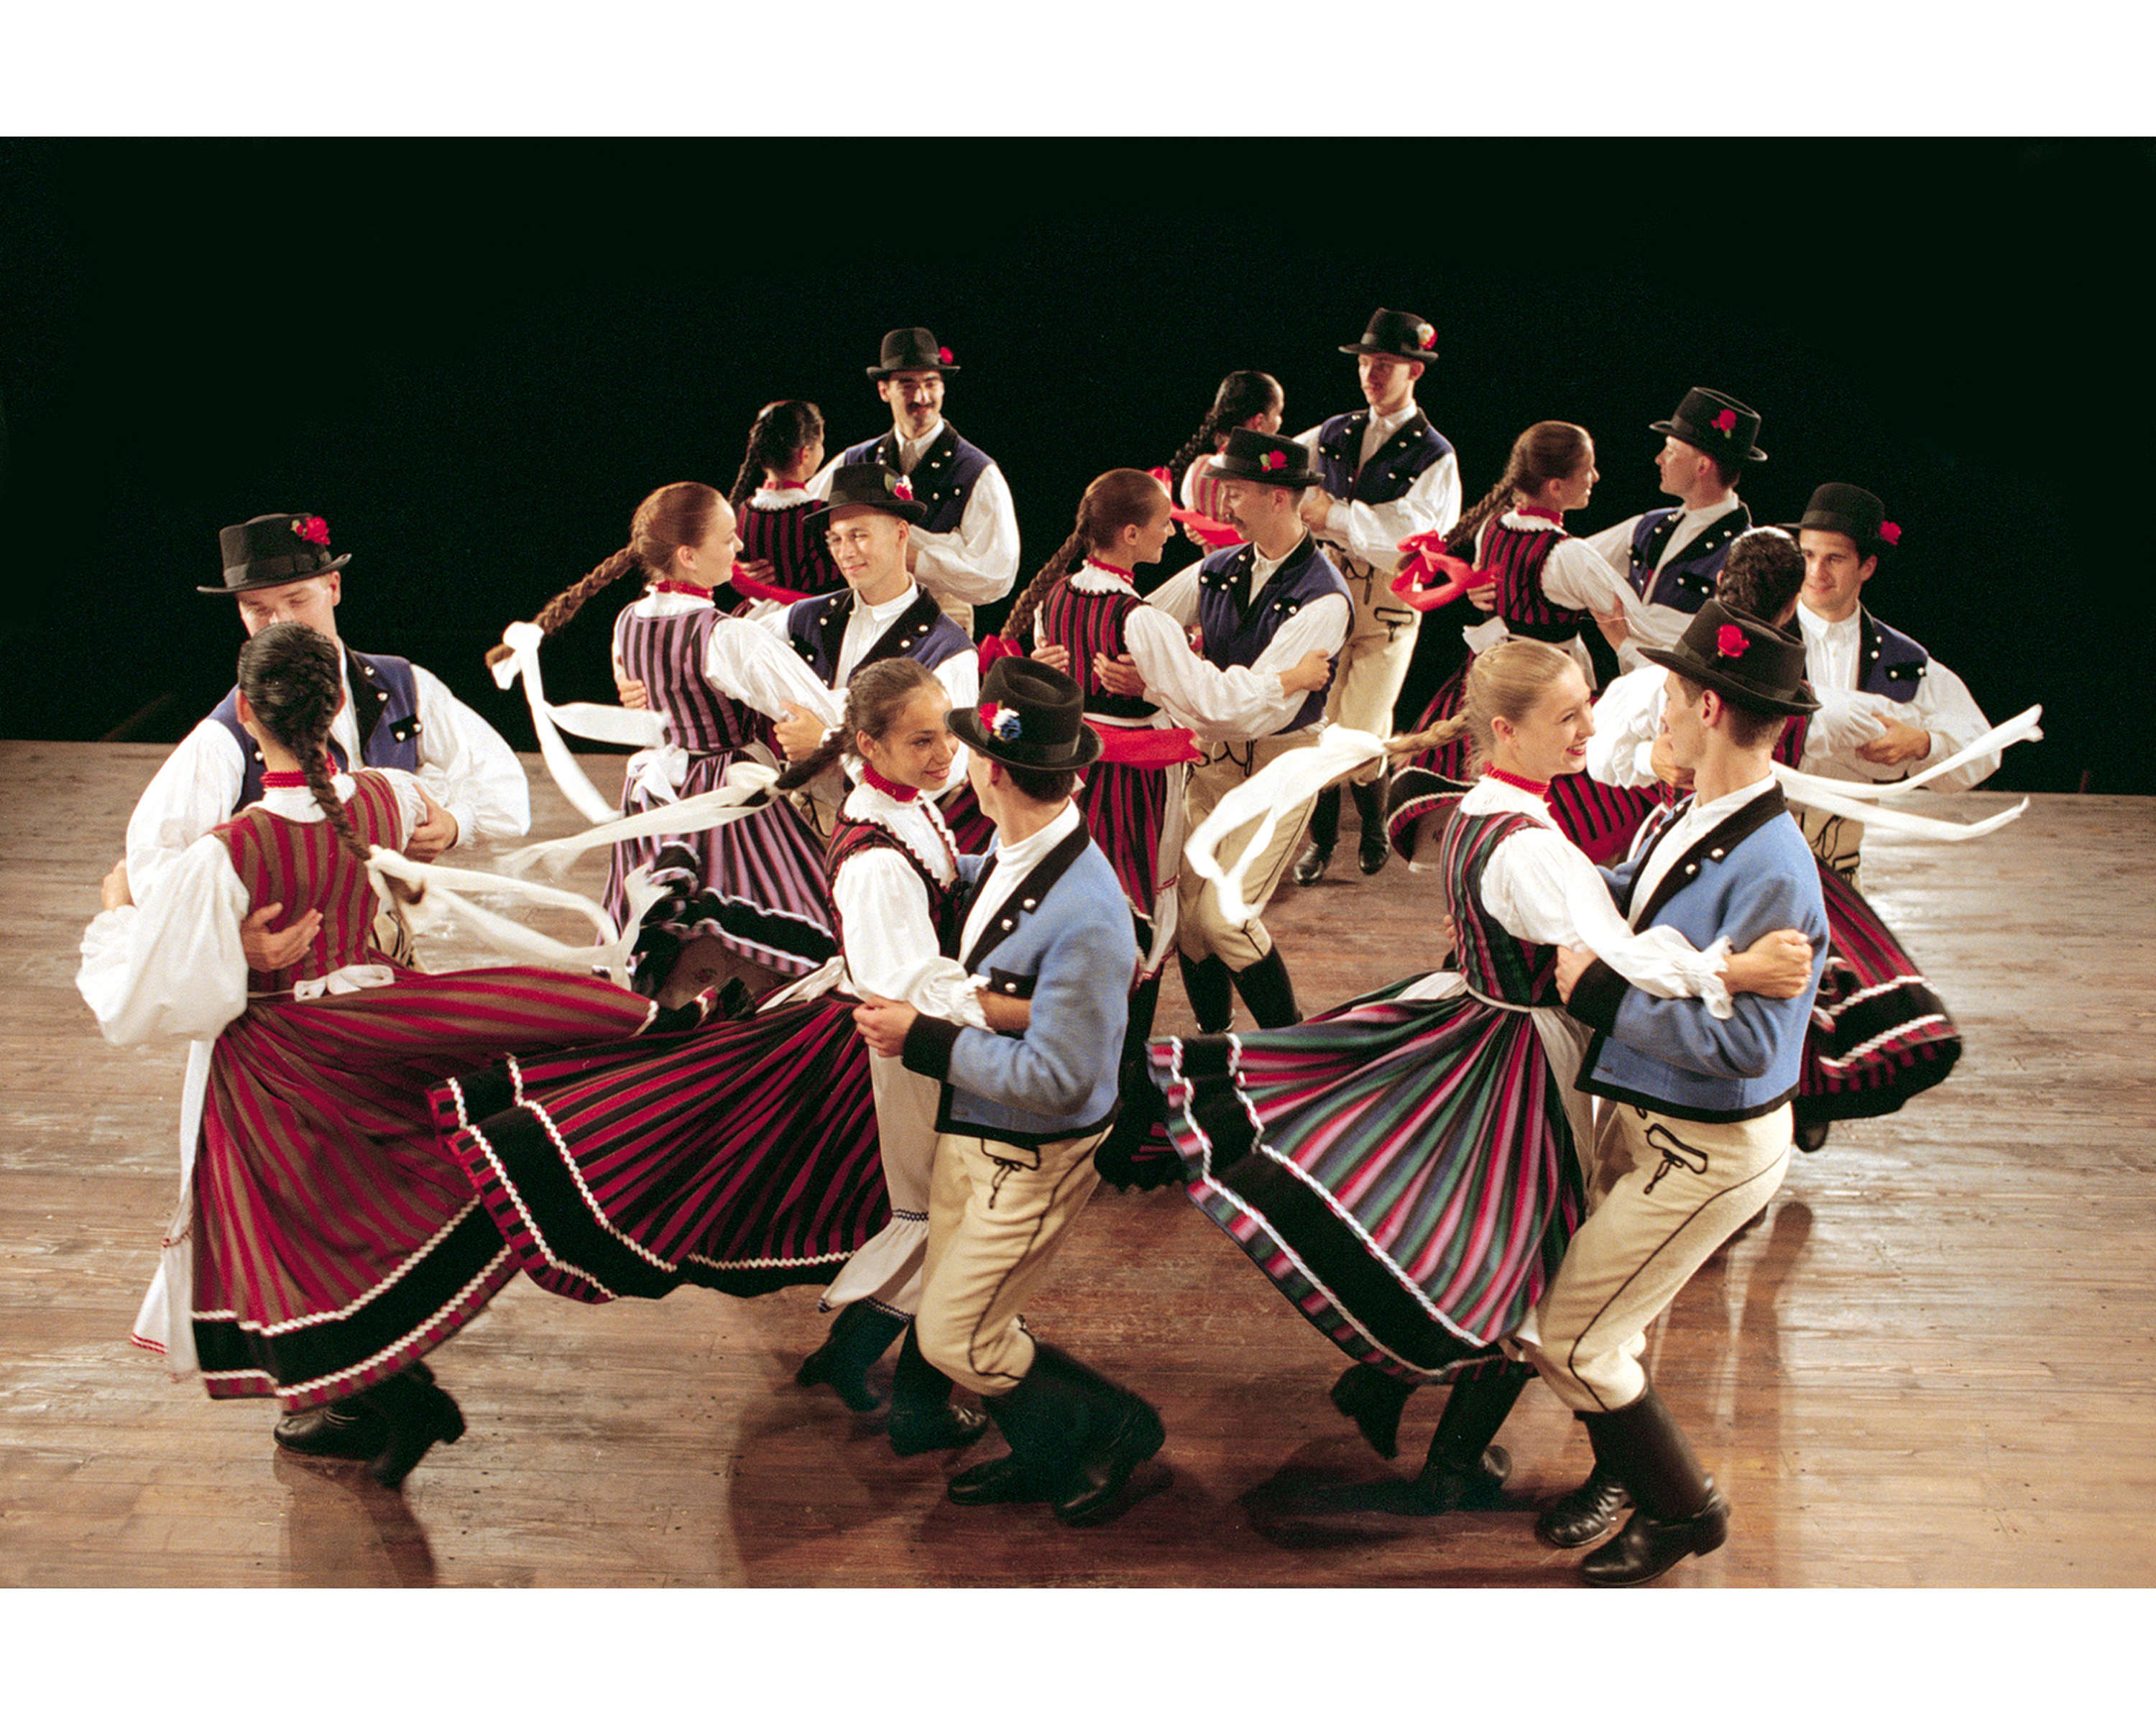 Traditional music and dance of Hungary come alive